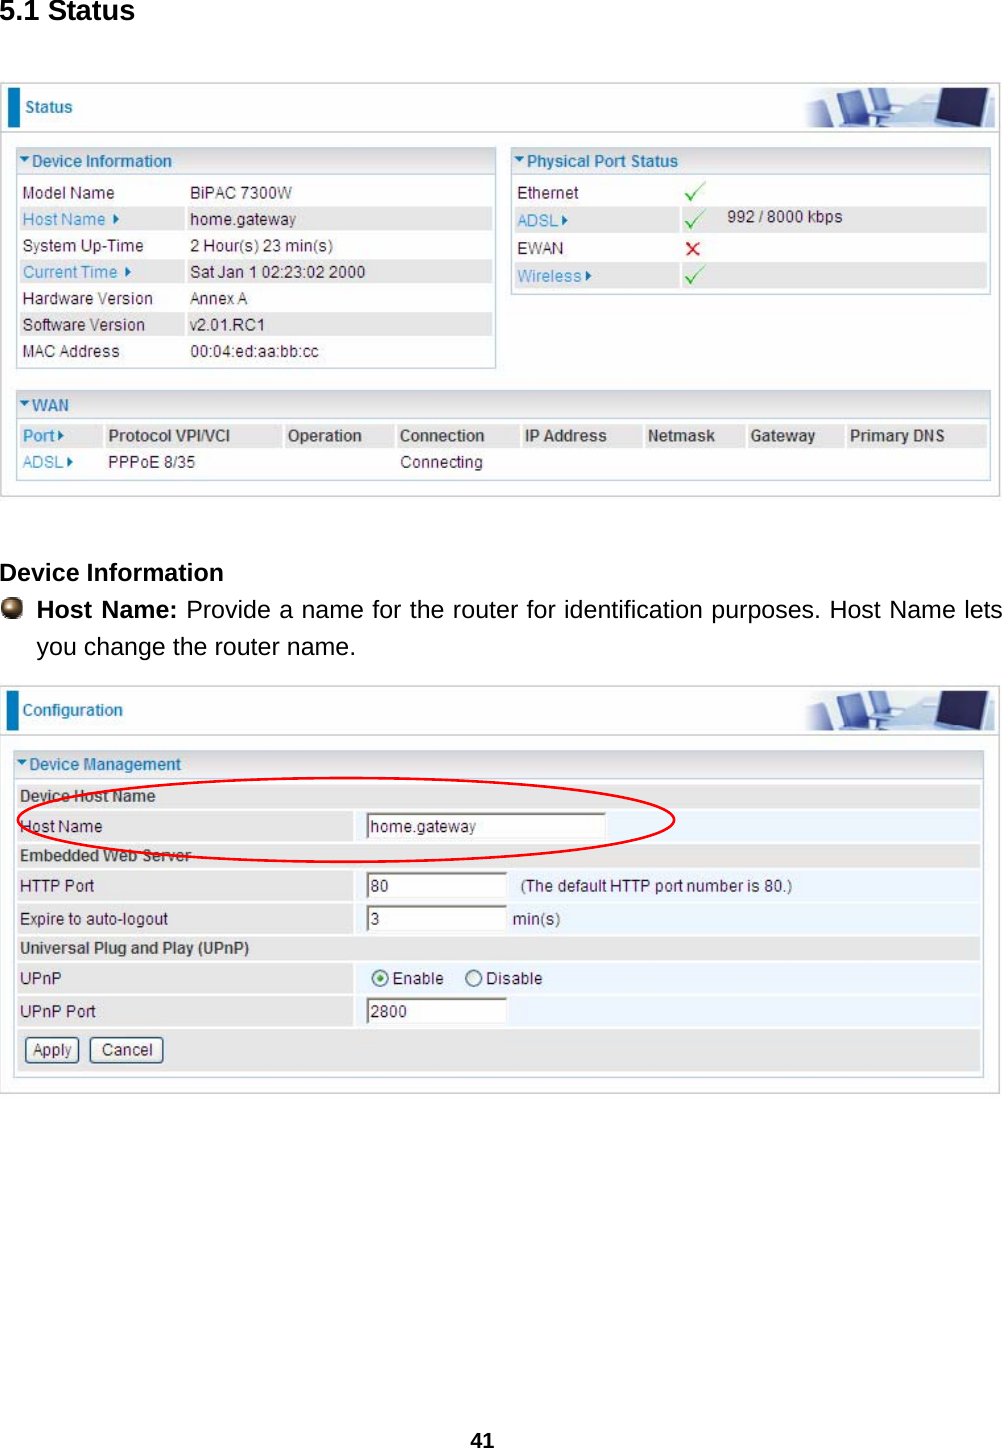 41 5.1 Status   Device Information   Host Name: Provide a name for the router for identification purposes. Host Name lets you change the router name.  